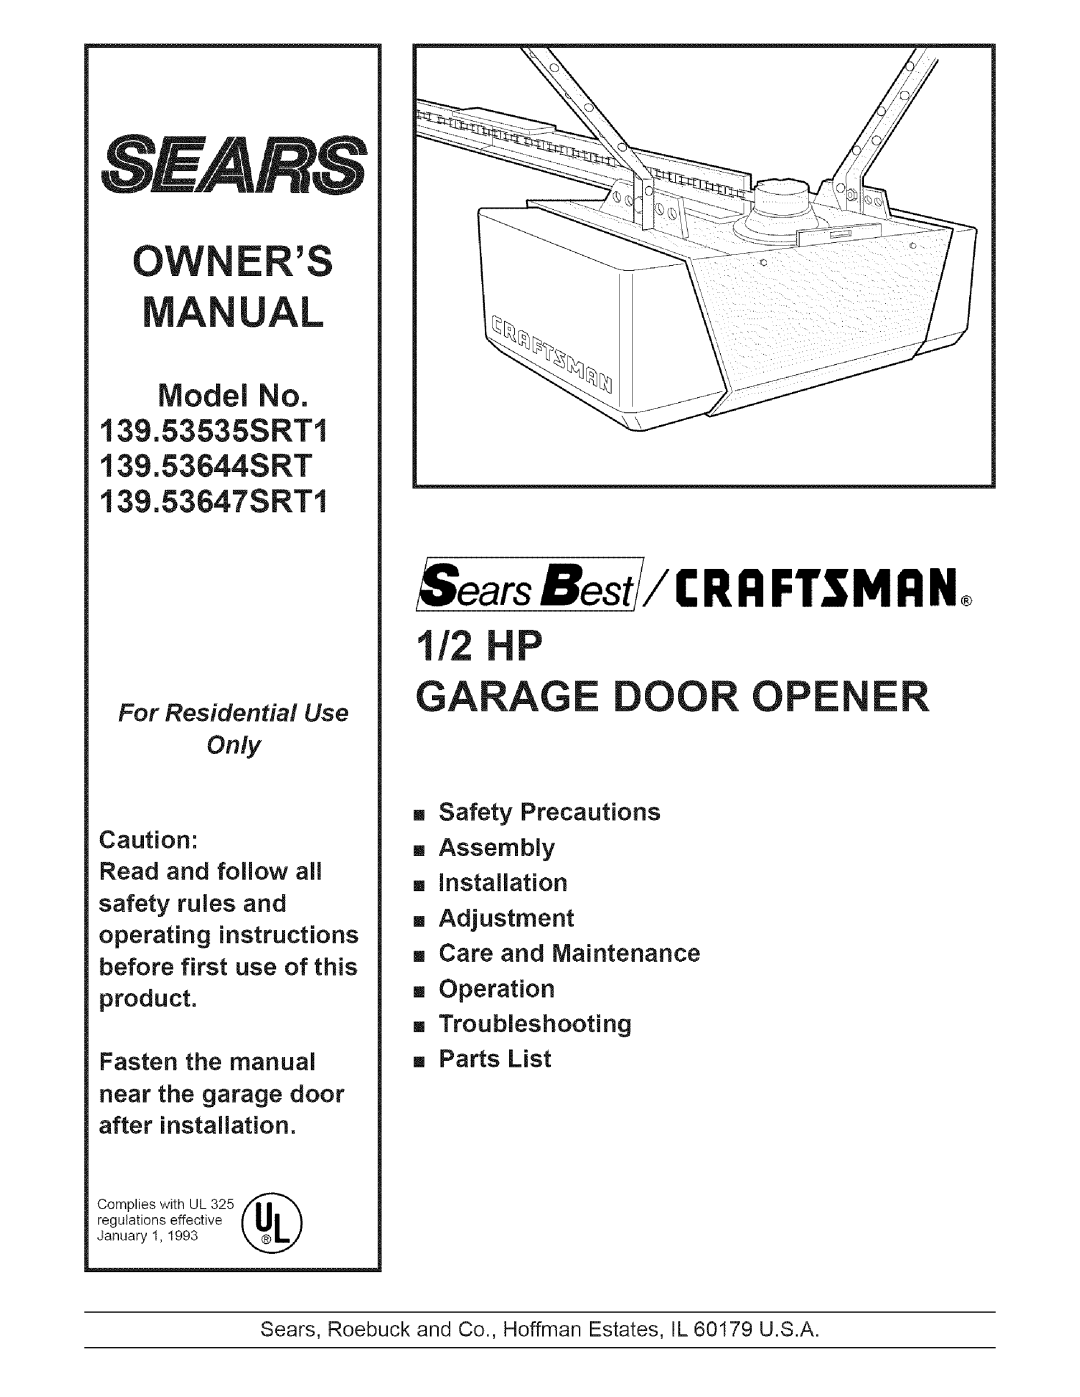 Sears 139.53535SRT1 operating instructions Owners Ual, 1/2 P GARAGE DOO OPENE, Model No, Only, before first use of this 